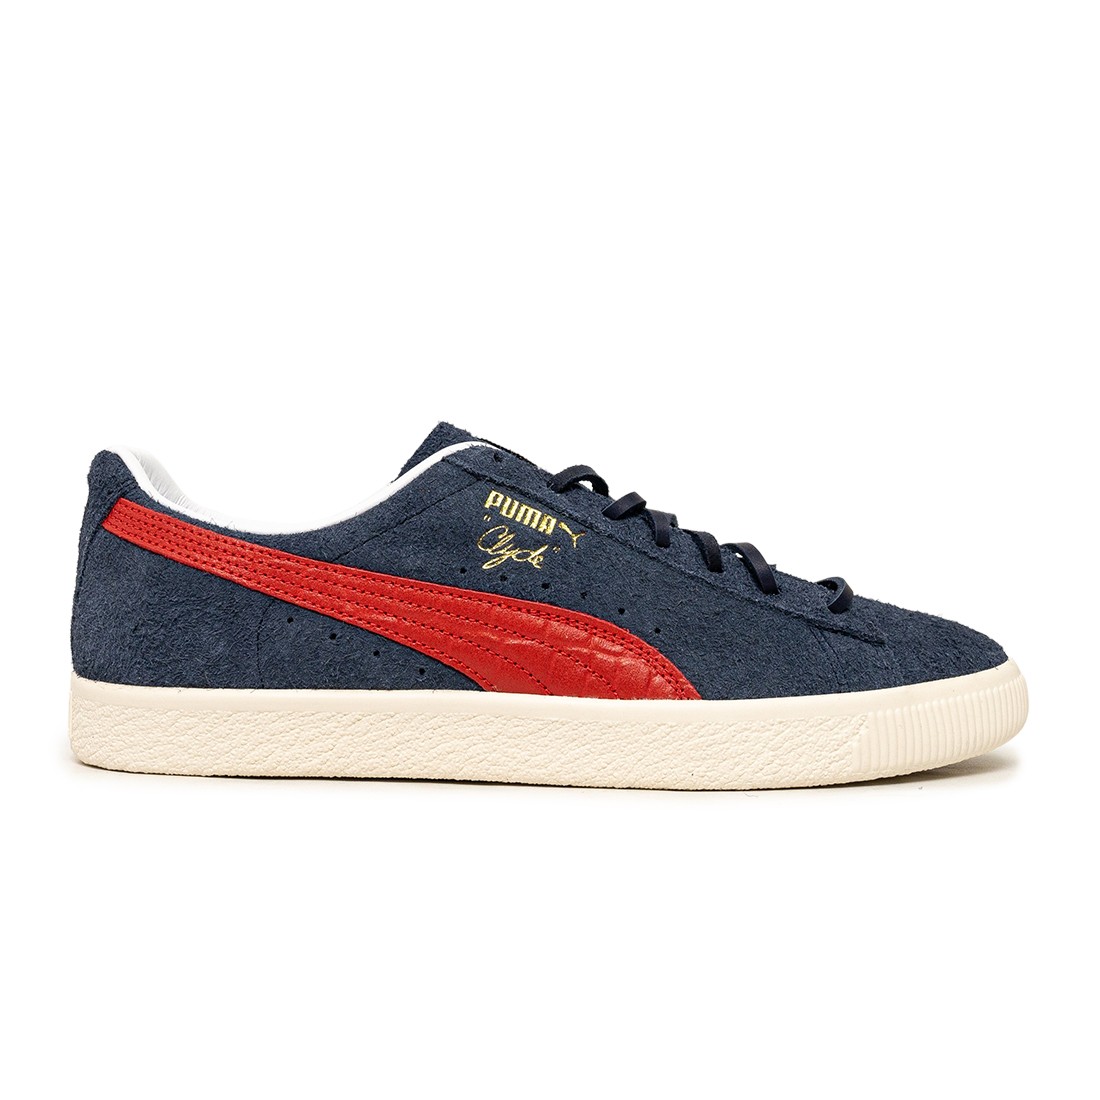 Puma Men Clyde Soho London (white / frosted ivory / new navy)